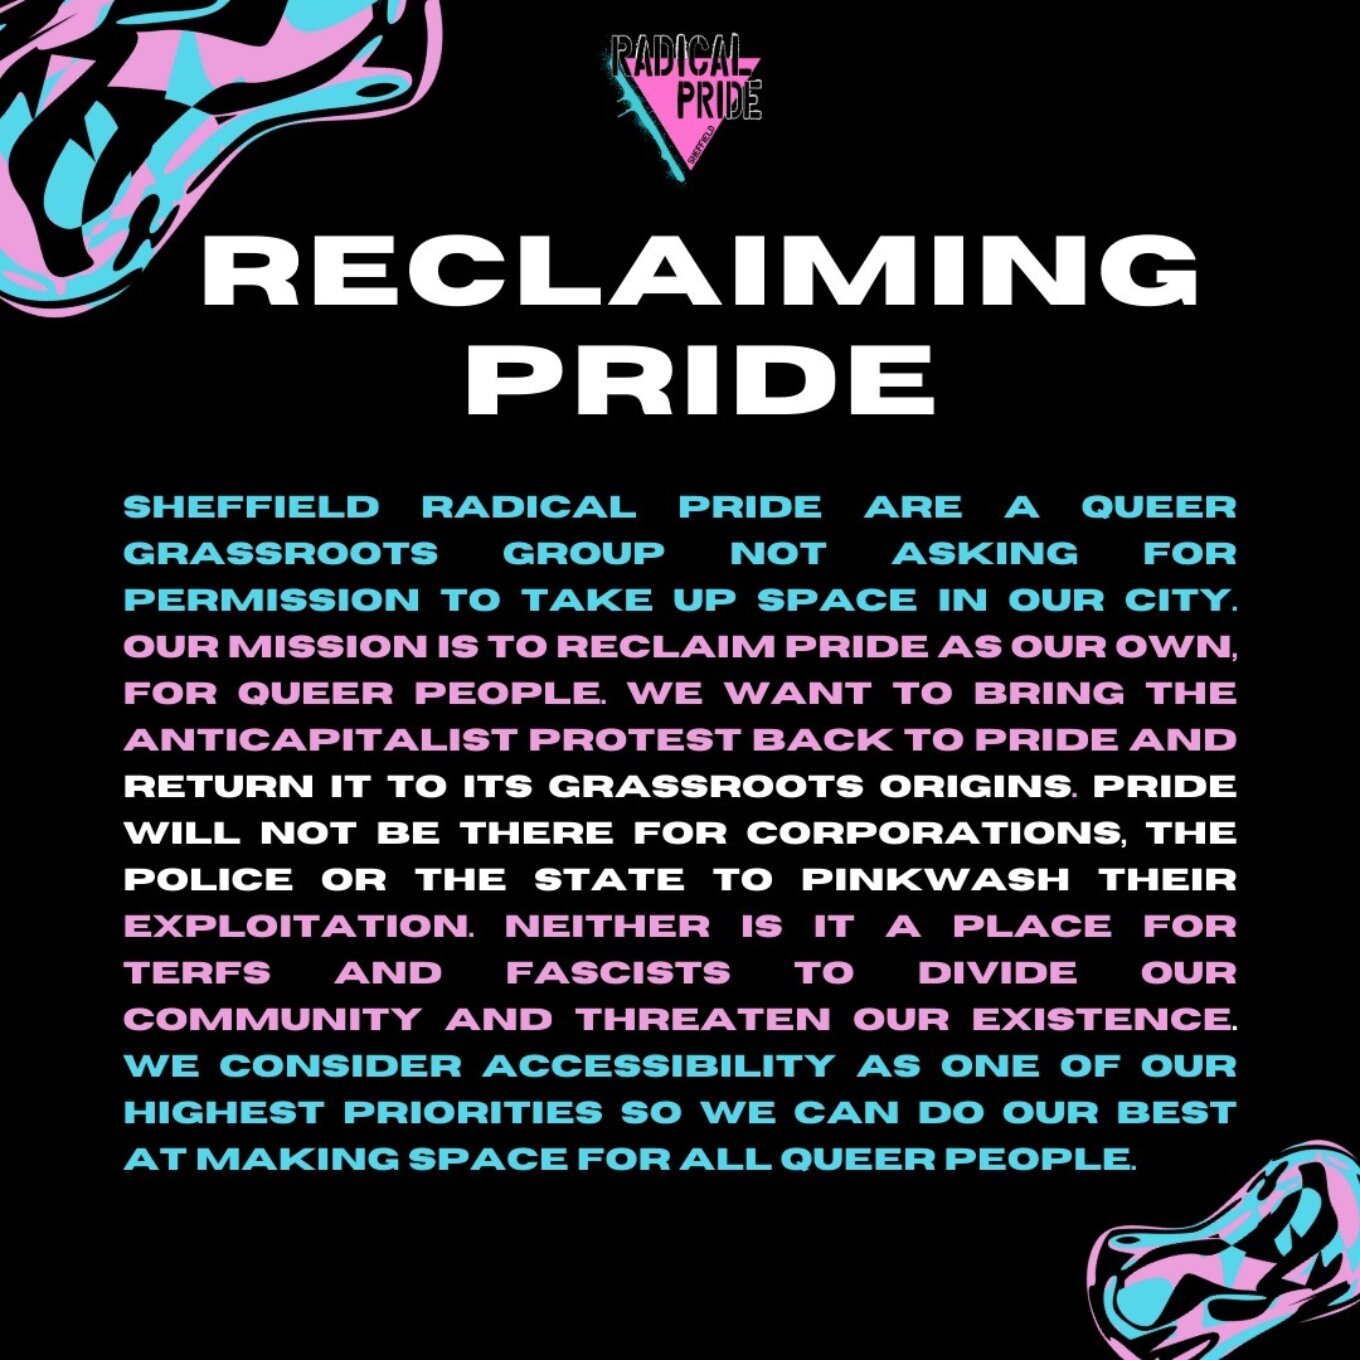 Radical pride Reclaiming pride. Sheffield radical pride are a queer grassroots group not asking for permission to take up space in our city. Our mission is to reclaim pride as our own, for queer people. We want to bring the anticapitalist protest back to pride and return it to its grassroots origins. Pride will not be there for corporations, the police or the state to pinkwash their exploitation. Neither is it a place for terfs and fascists to divide our community and threaten our existence. We consider accessibility as one of our highest priorities so we can do our best at making space for all queer people.